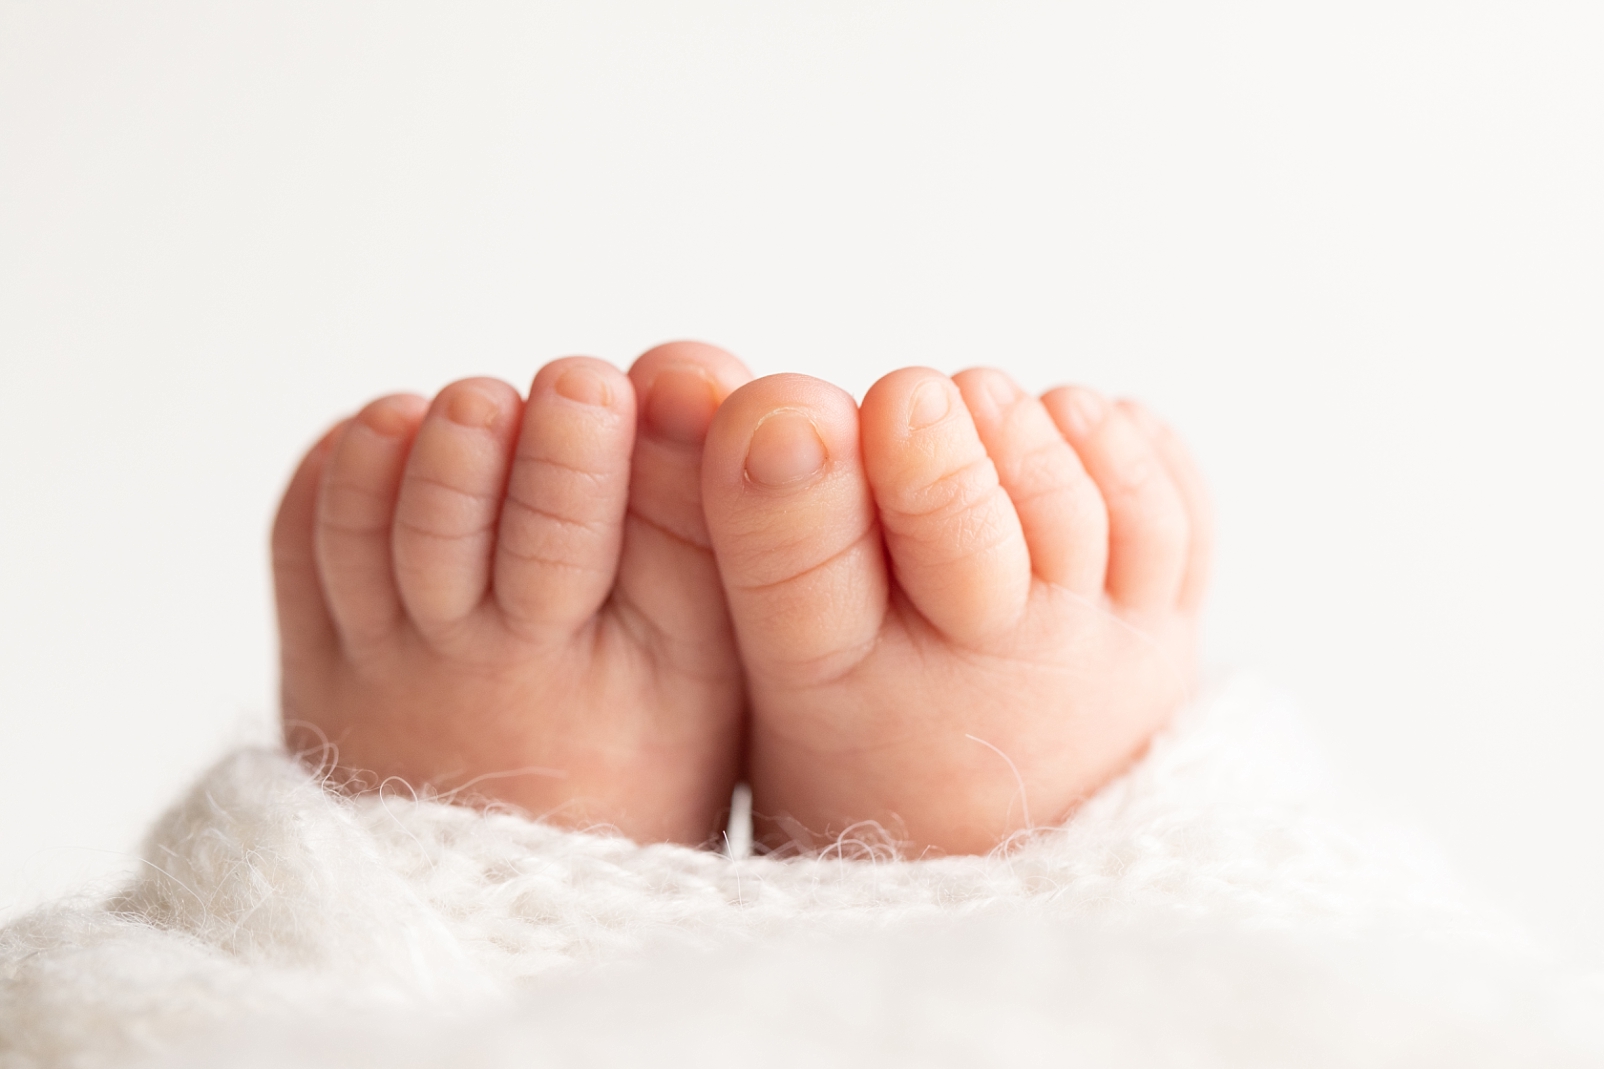 newborn toes show intricate detail with macro photography and why you should hire a professional newborn photographer